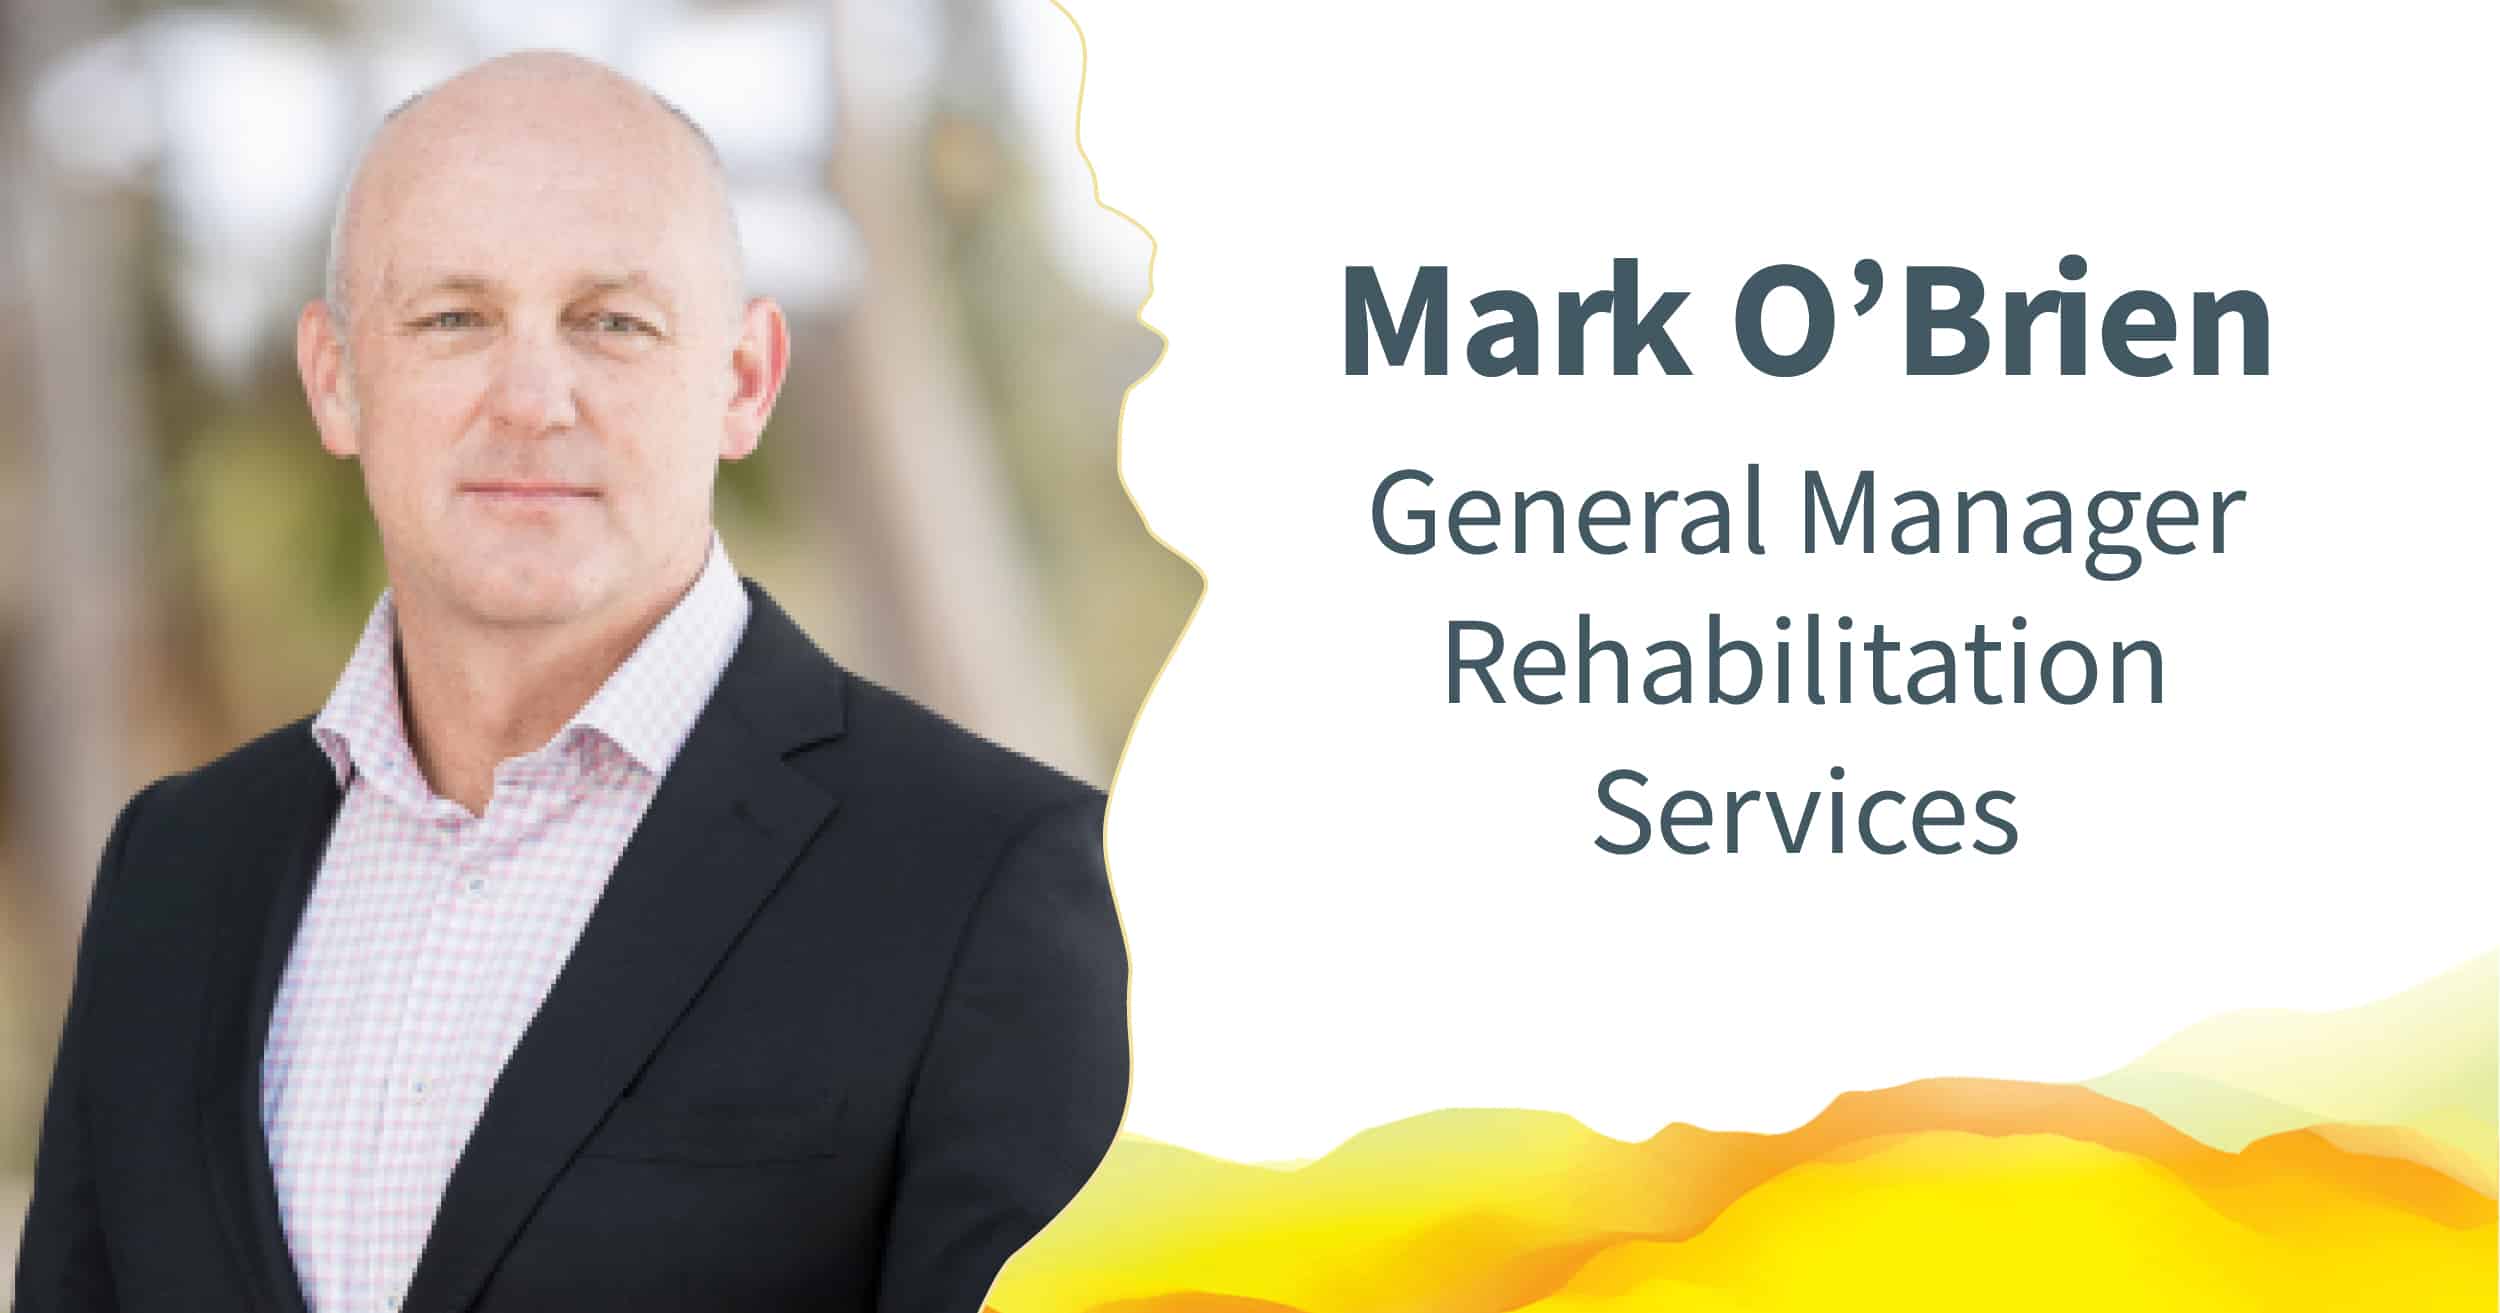 Mark smiling at the camera. Text alongside reads: "Mark O'Brien - General Manager Rehabilitation Services